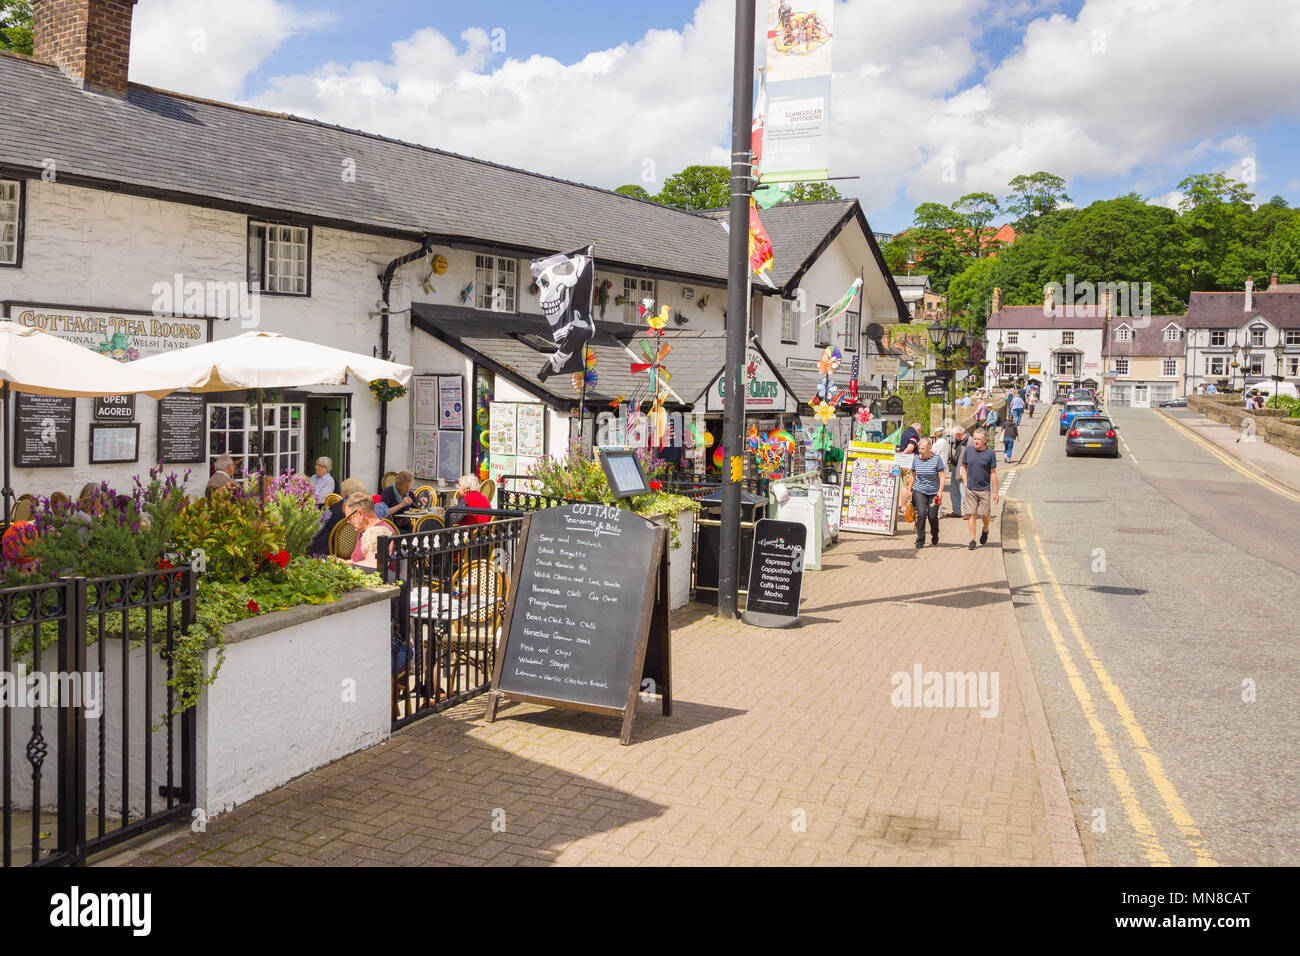 The Cottage tea rooms and gift shop  outlets next to the Dee Bridge in the Welsh town of Llangollen Stock Photo